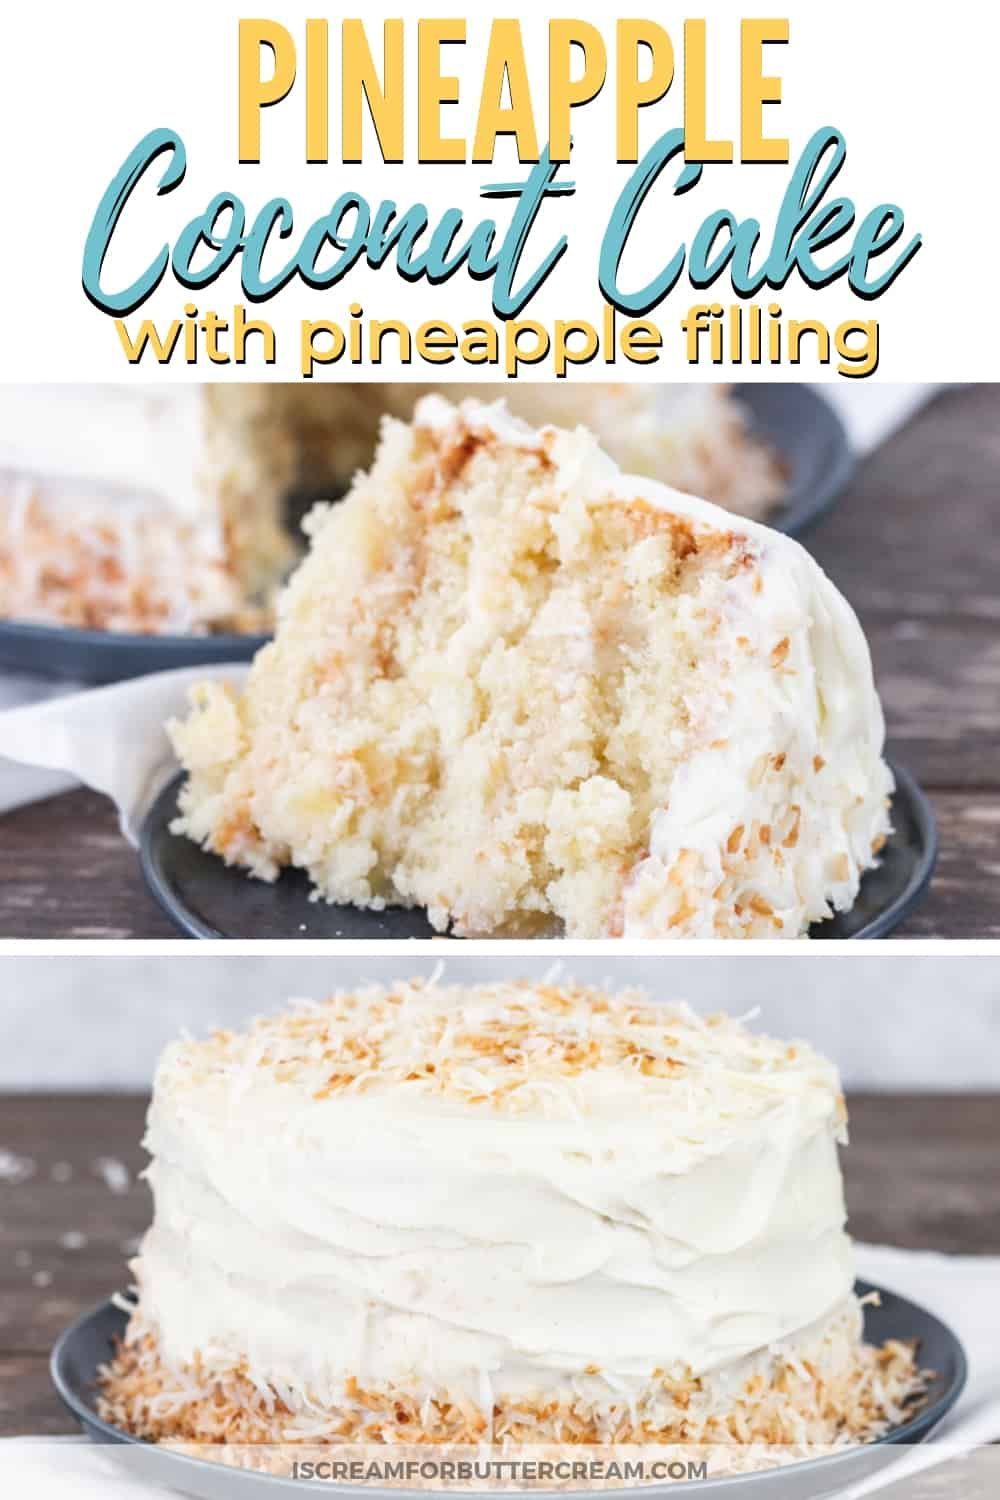 Pineapple Coconut Cake with Pineapple Filling -   15 cake Pineapple frostings ideas